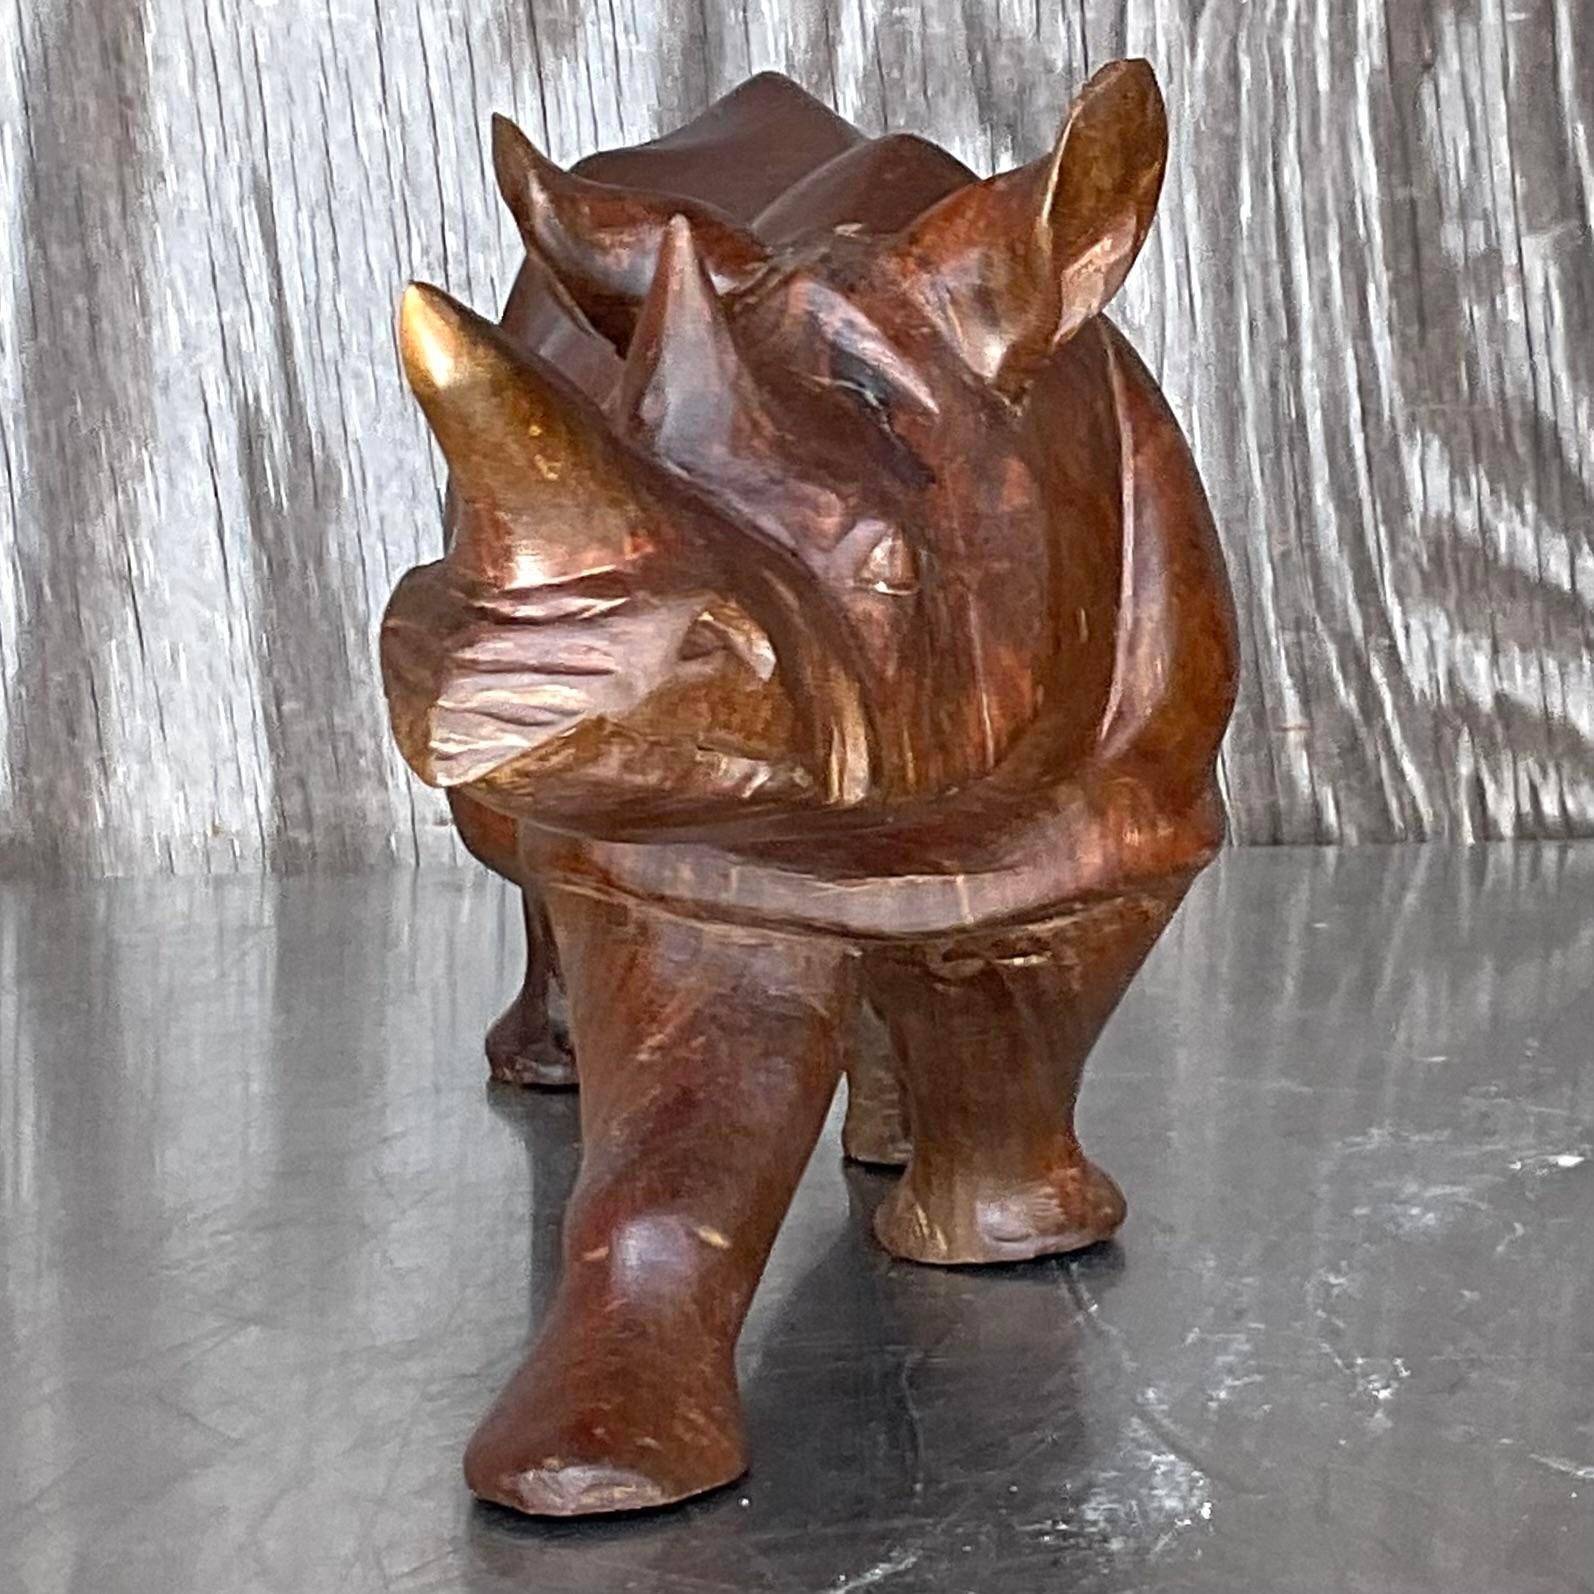 A fabulous vintage Boho rhino sculpture. A chic solid wood specimen with beautiful attention to detail. Acquired from a Palm Beach Estate.